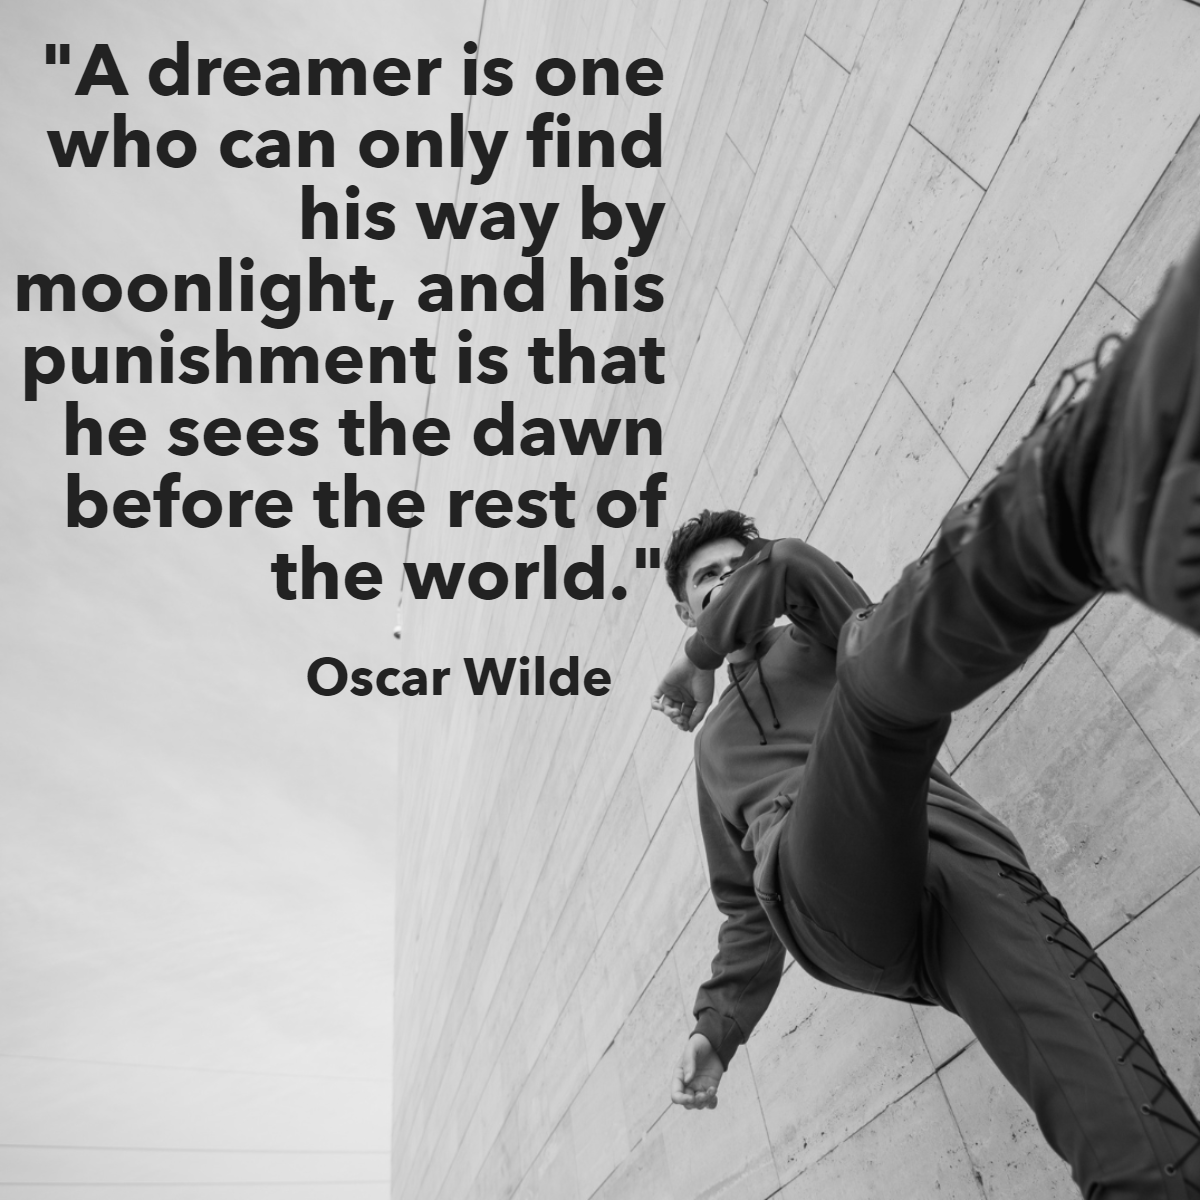 'A dreamer is one who can only find his way by moonlight, and his punishment is that he sees the dawn before the rest of the world.'
—  Oscar Wilde

#quoteoftheday✏️ #quotestagram #lifequotes #quotes 
 #RealestateAppleton #Appletonwisconsin